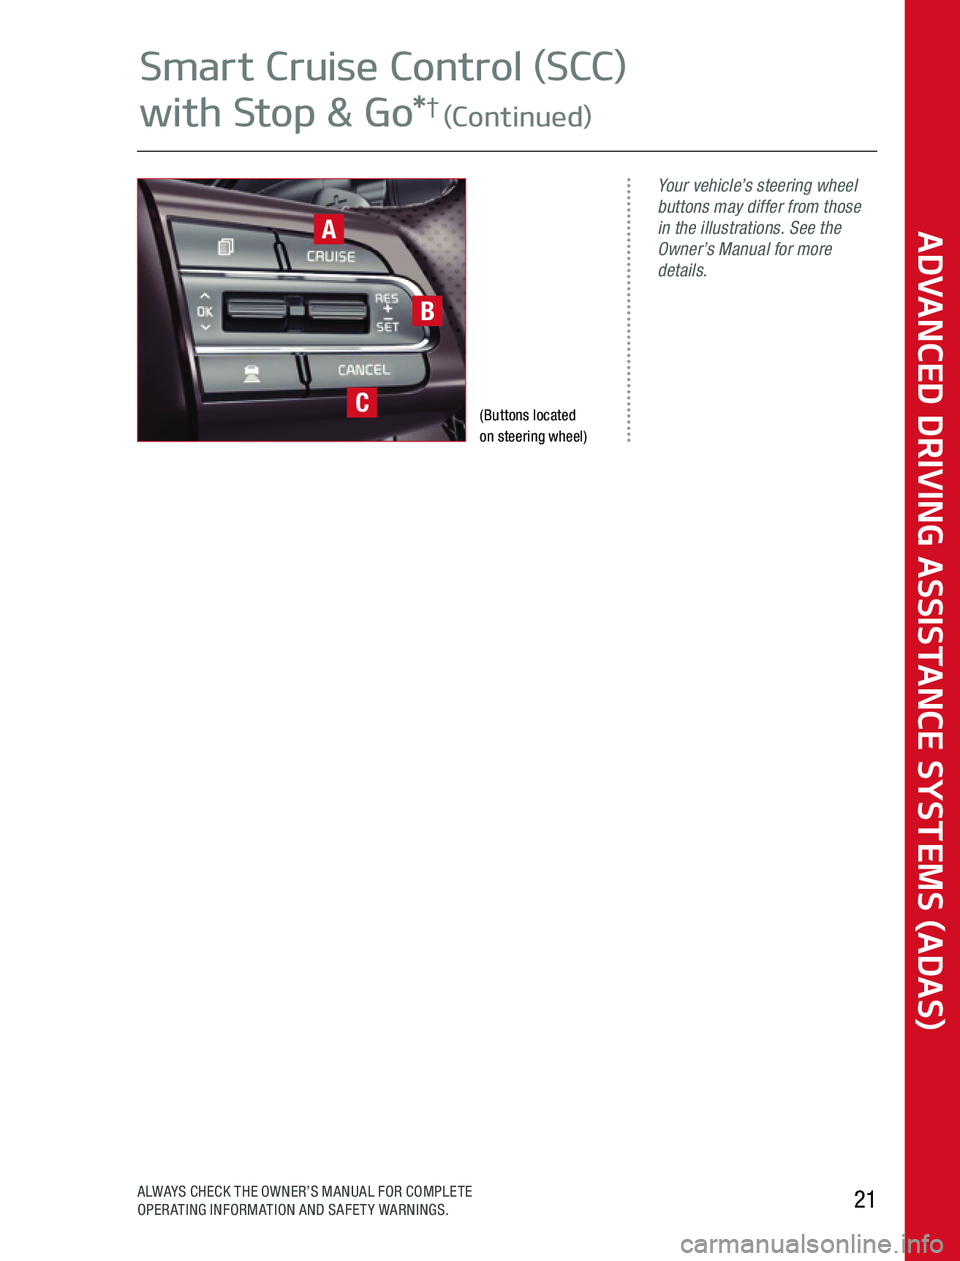 KIA K900 2020  Advanced Driving Assistance System (Buttons located  on steering wheel)
Your vehicle’s steering wheel buttons may differ from those in the illustrations. See the Owner’s Manual for more details.
21ALWAYS CHECK THE OWNER’S MANUAL 